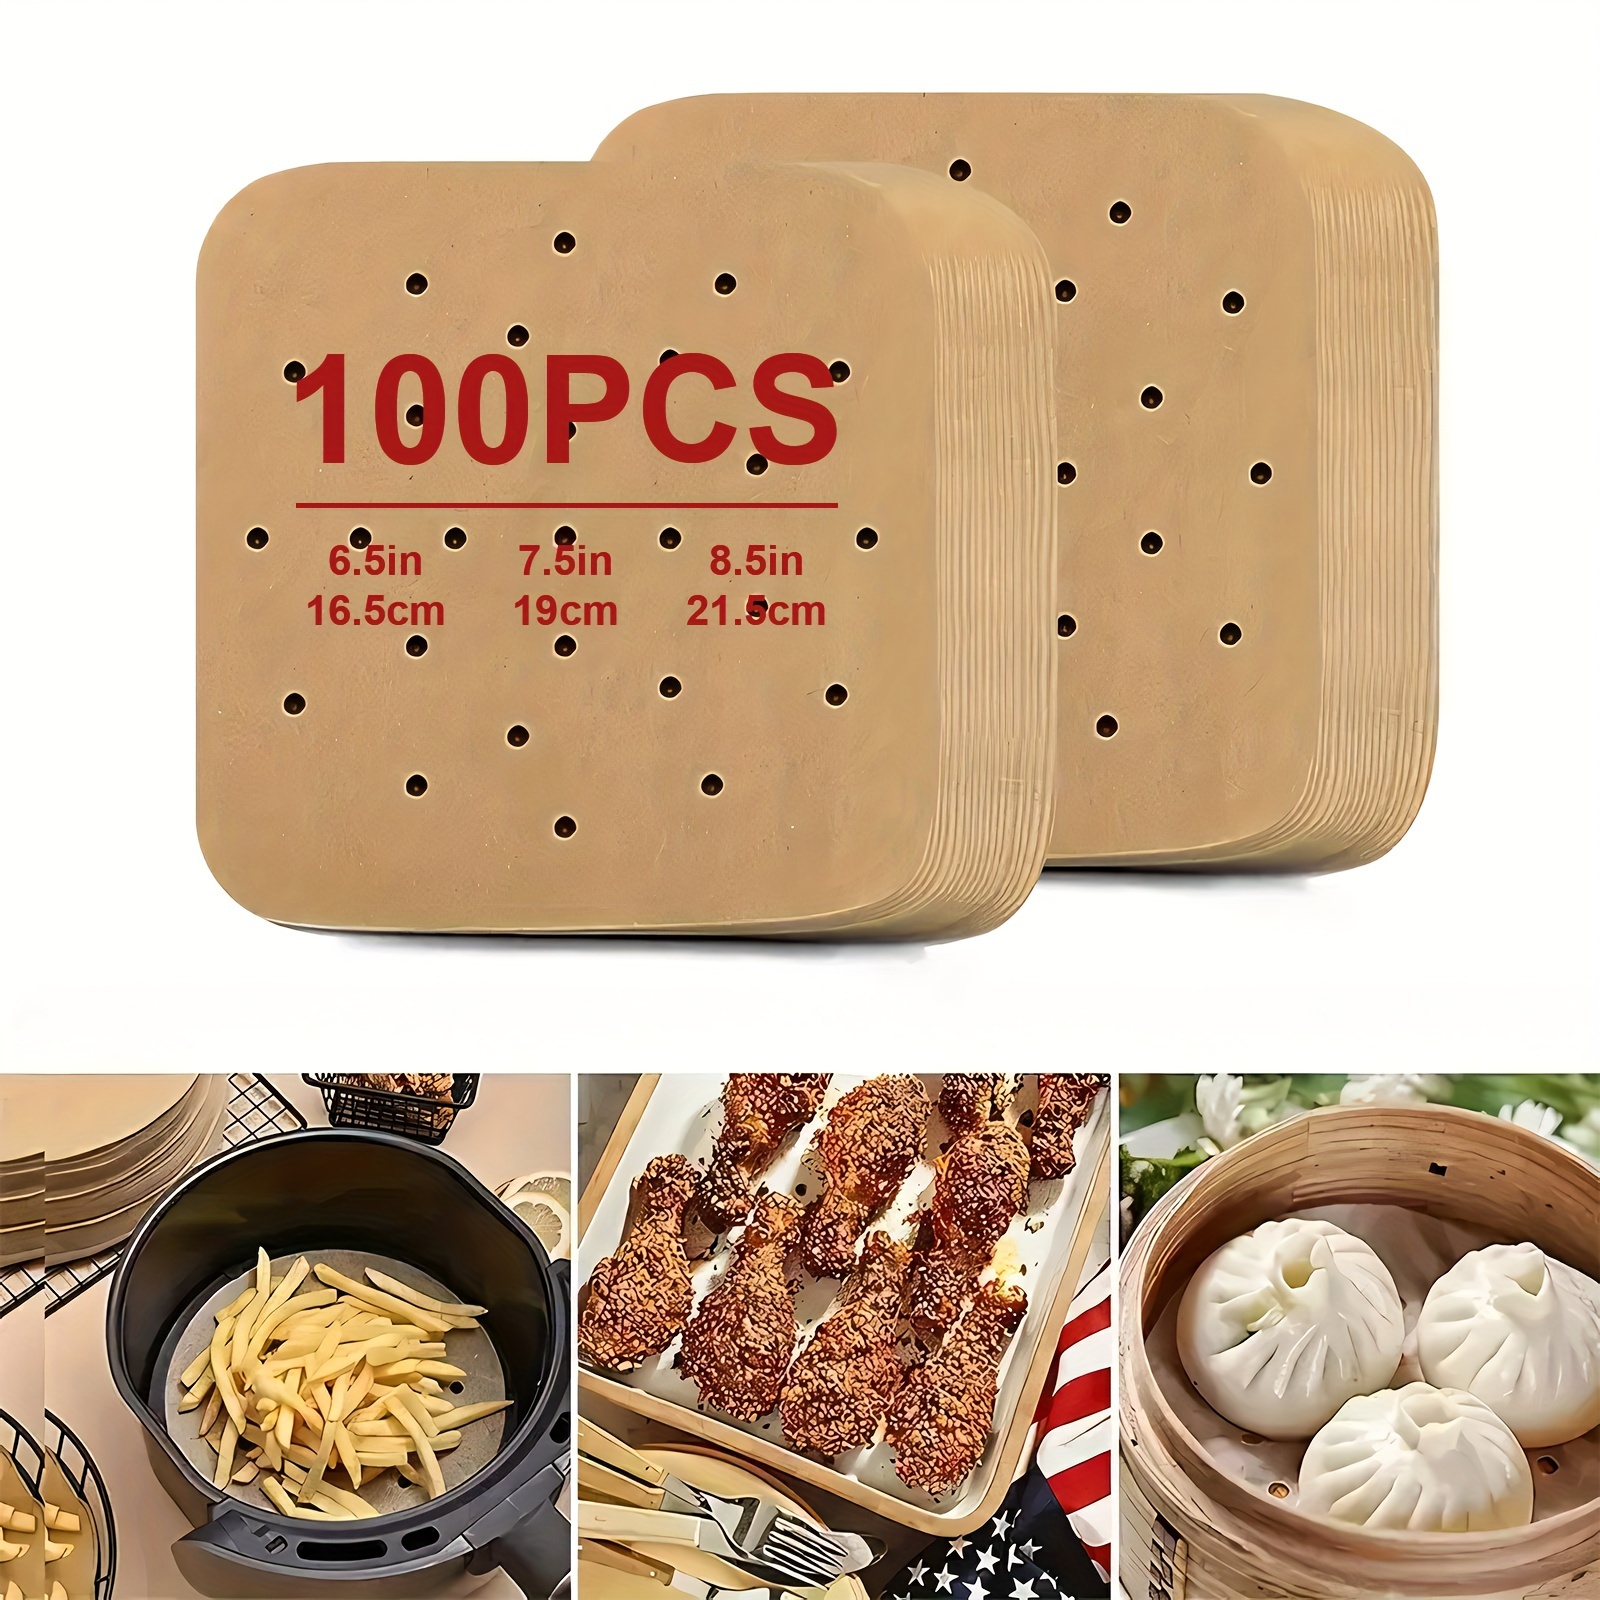 

100pcs, Air Fryer Parchment Paper, 6.5/7.5/8.5 Inches Square Perforated Air Fryer Disposable Paper Liners For Air Fryer, Bamboo Steamer, Oven, Kitchen Baking Tools